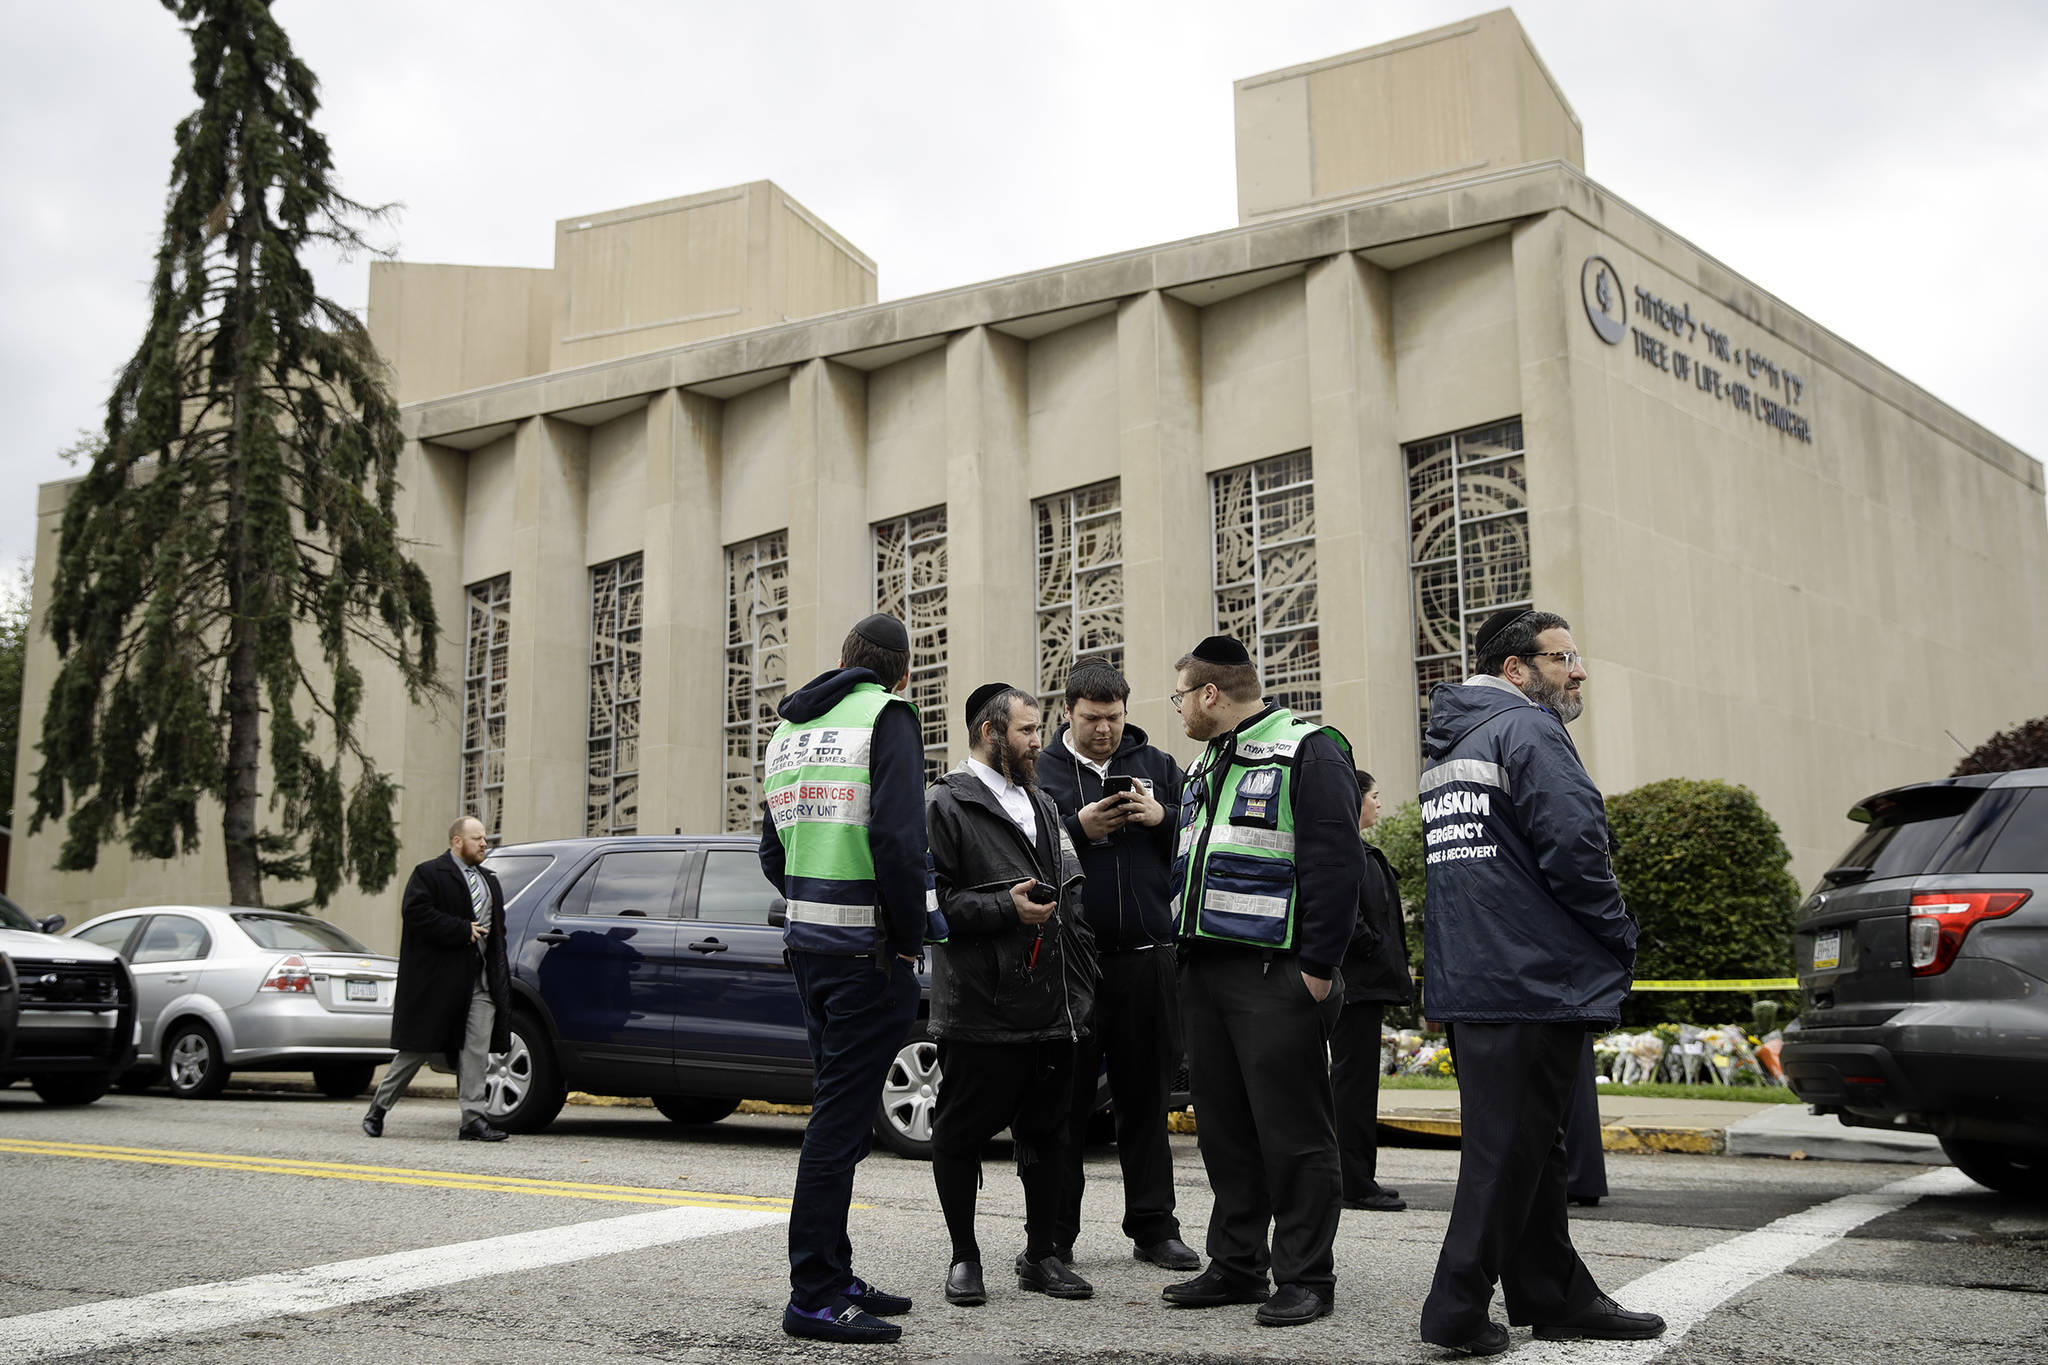 Personnel from Chesed Shel Emes Emergency Services and Recovery Unit gather near the Tree of Life Synagogue in Pittsburgh, Sunday, Oct. 28, 2018. Robert Bowers, the suspect in the mass shooting at the synagogue, expressed hatred of Jews during the rampage and told officers afterward that Jews were committing genocide and he wanted them all to die, according to charging documents made public Sunday. (AP Photo/Matt Rourke)